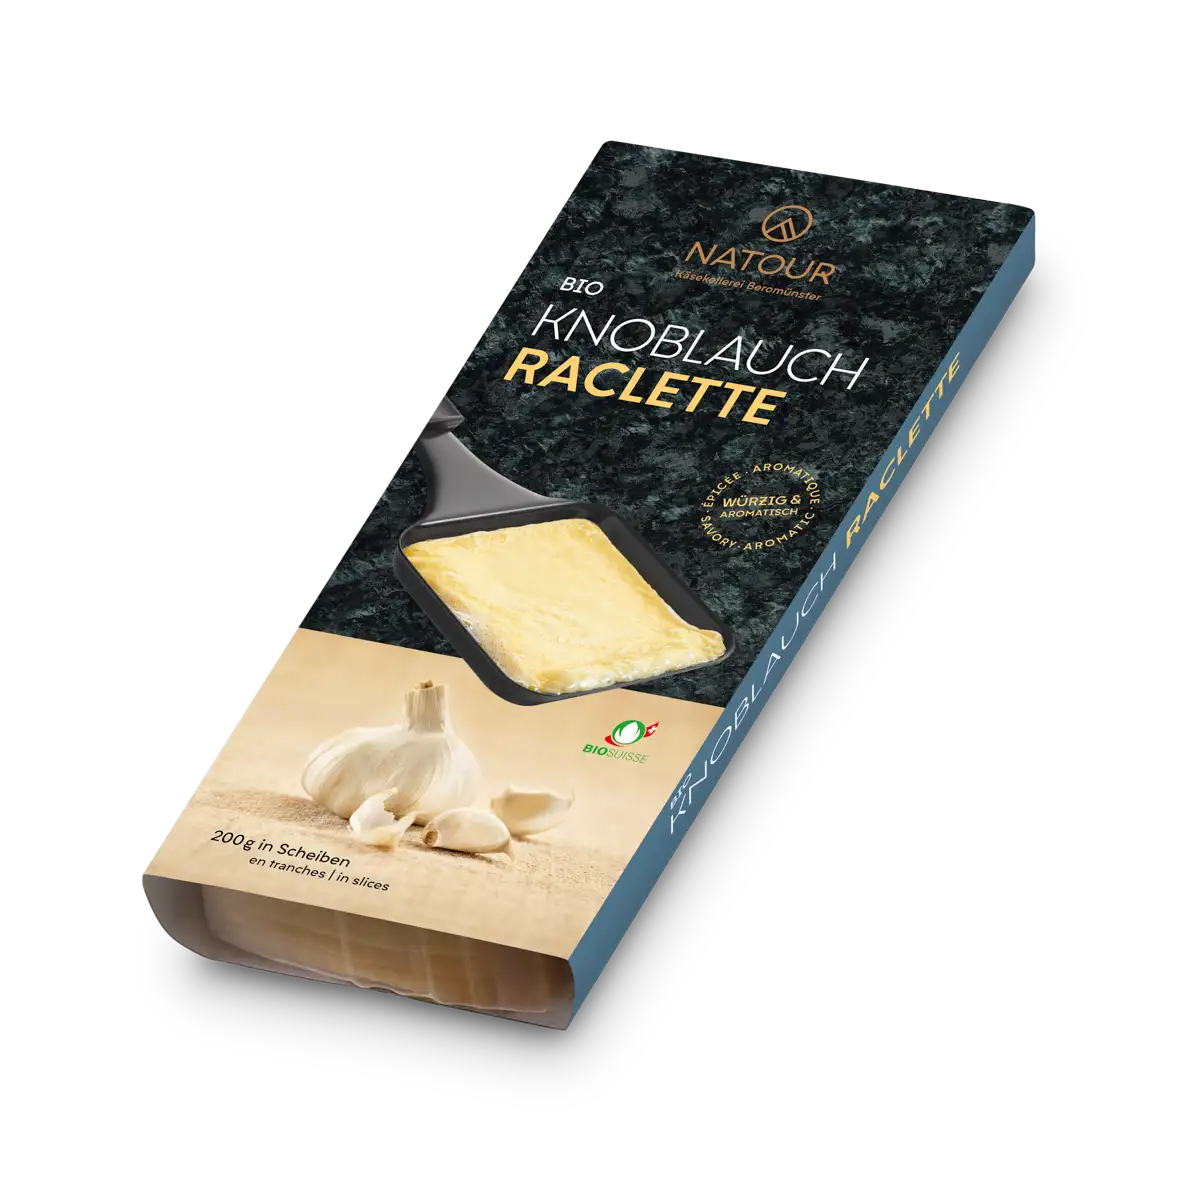 Raclette Knoblauch